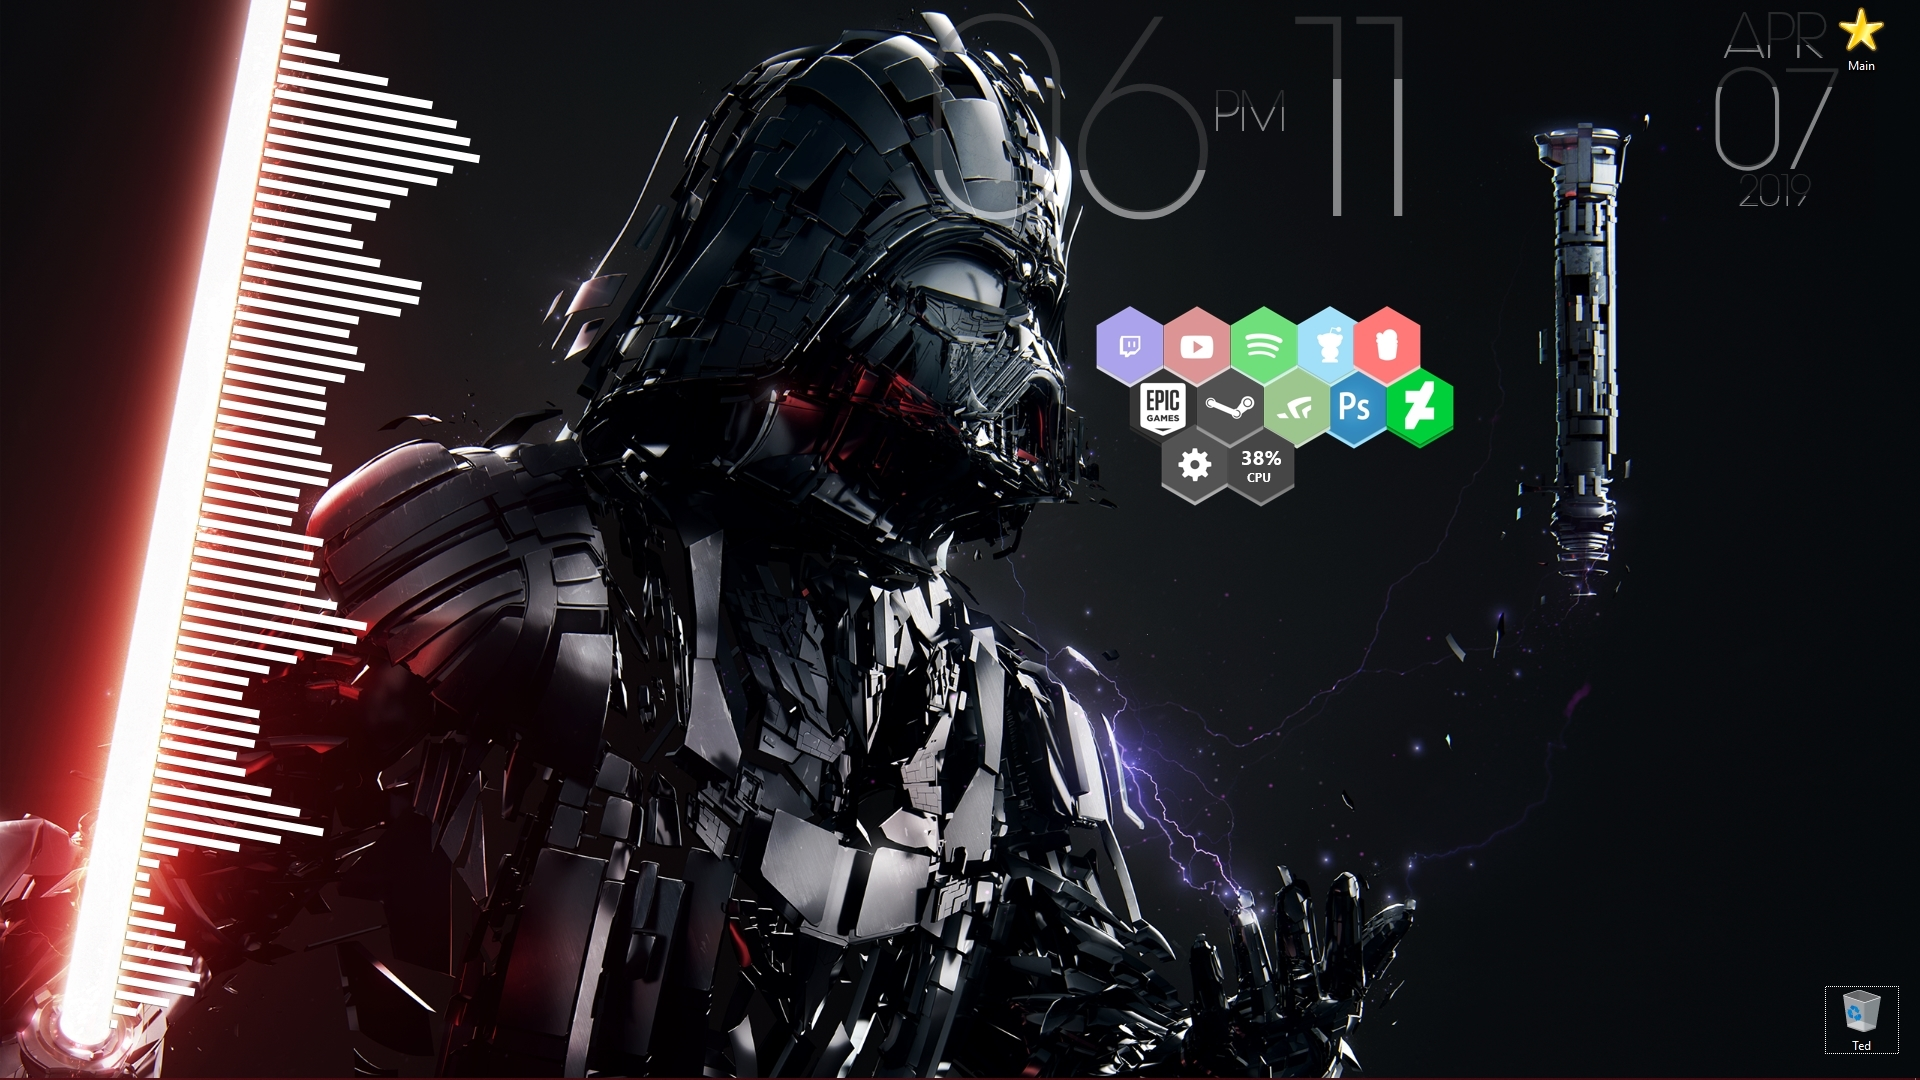 Wallpaper Engine + Rainmeter = Greatness. Darth Vader Wallpaper from Wallpaper Engine, Monstercat Audio Visulizer, Honeycomb for the icons. L1MIT for the time and date. (Links in comments)